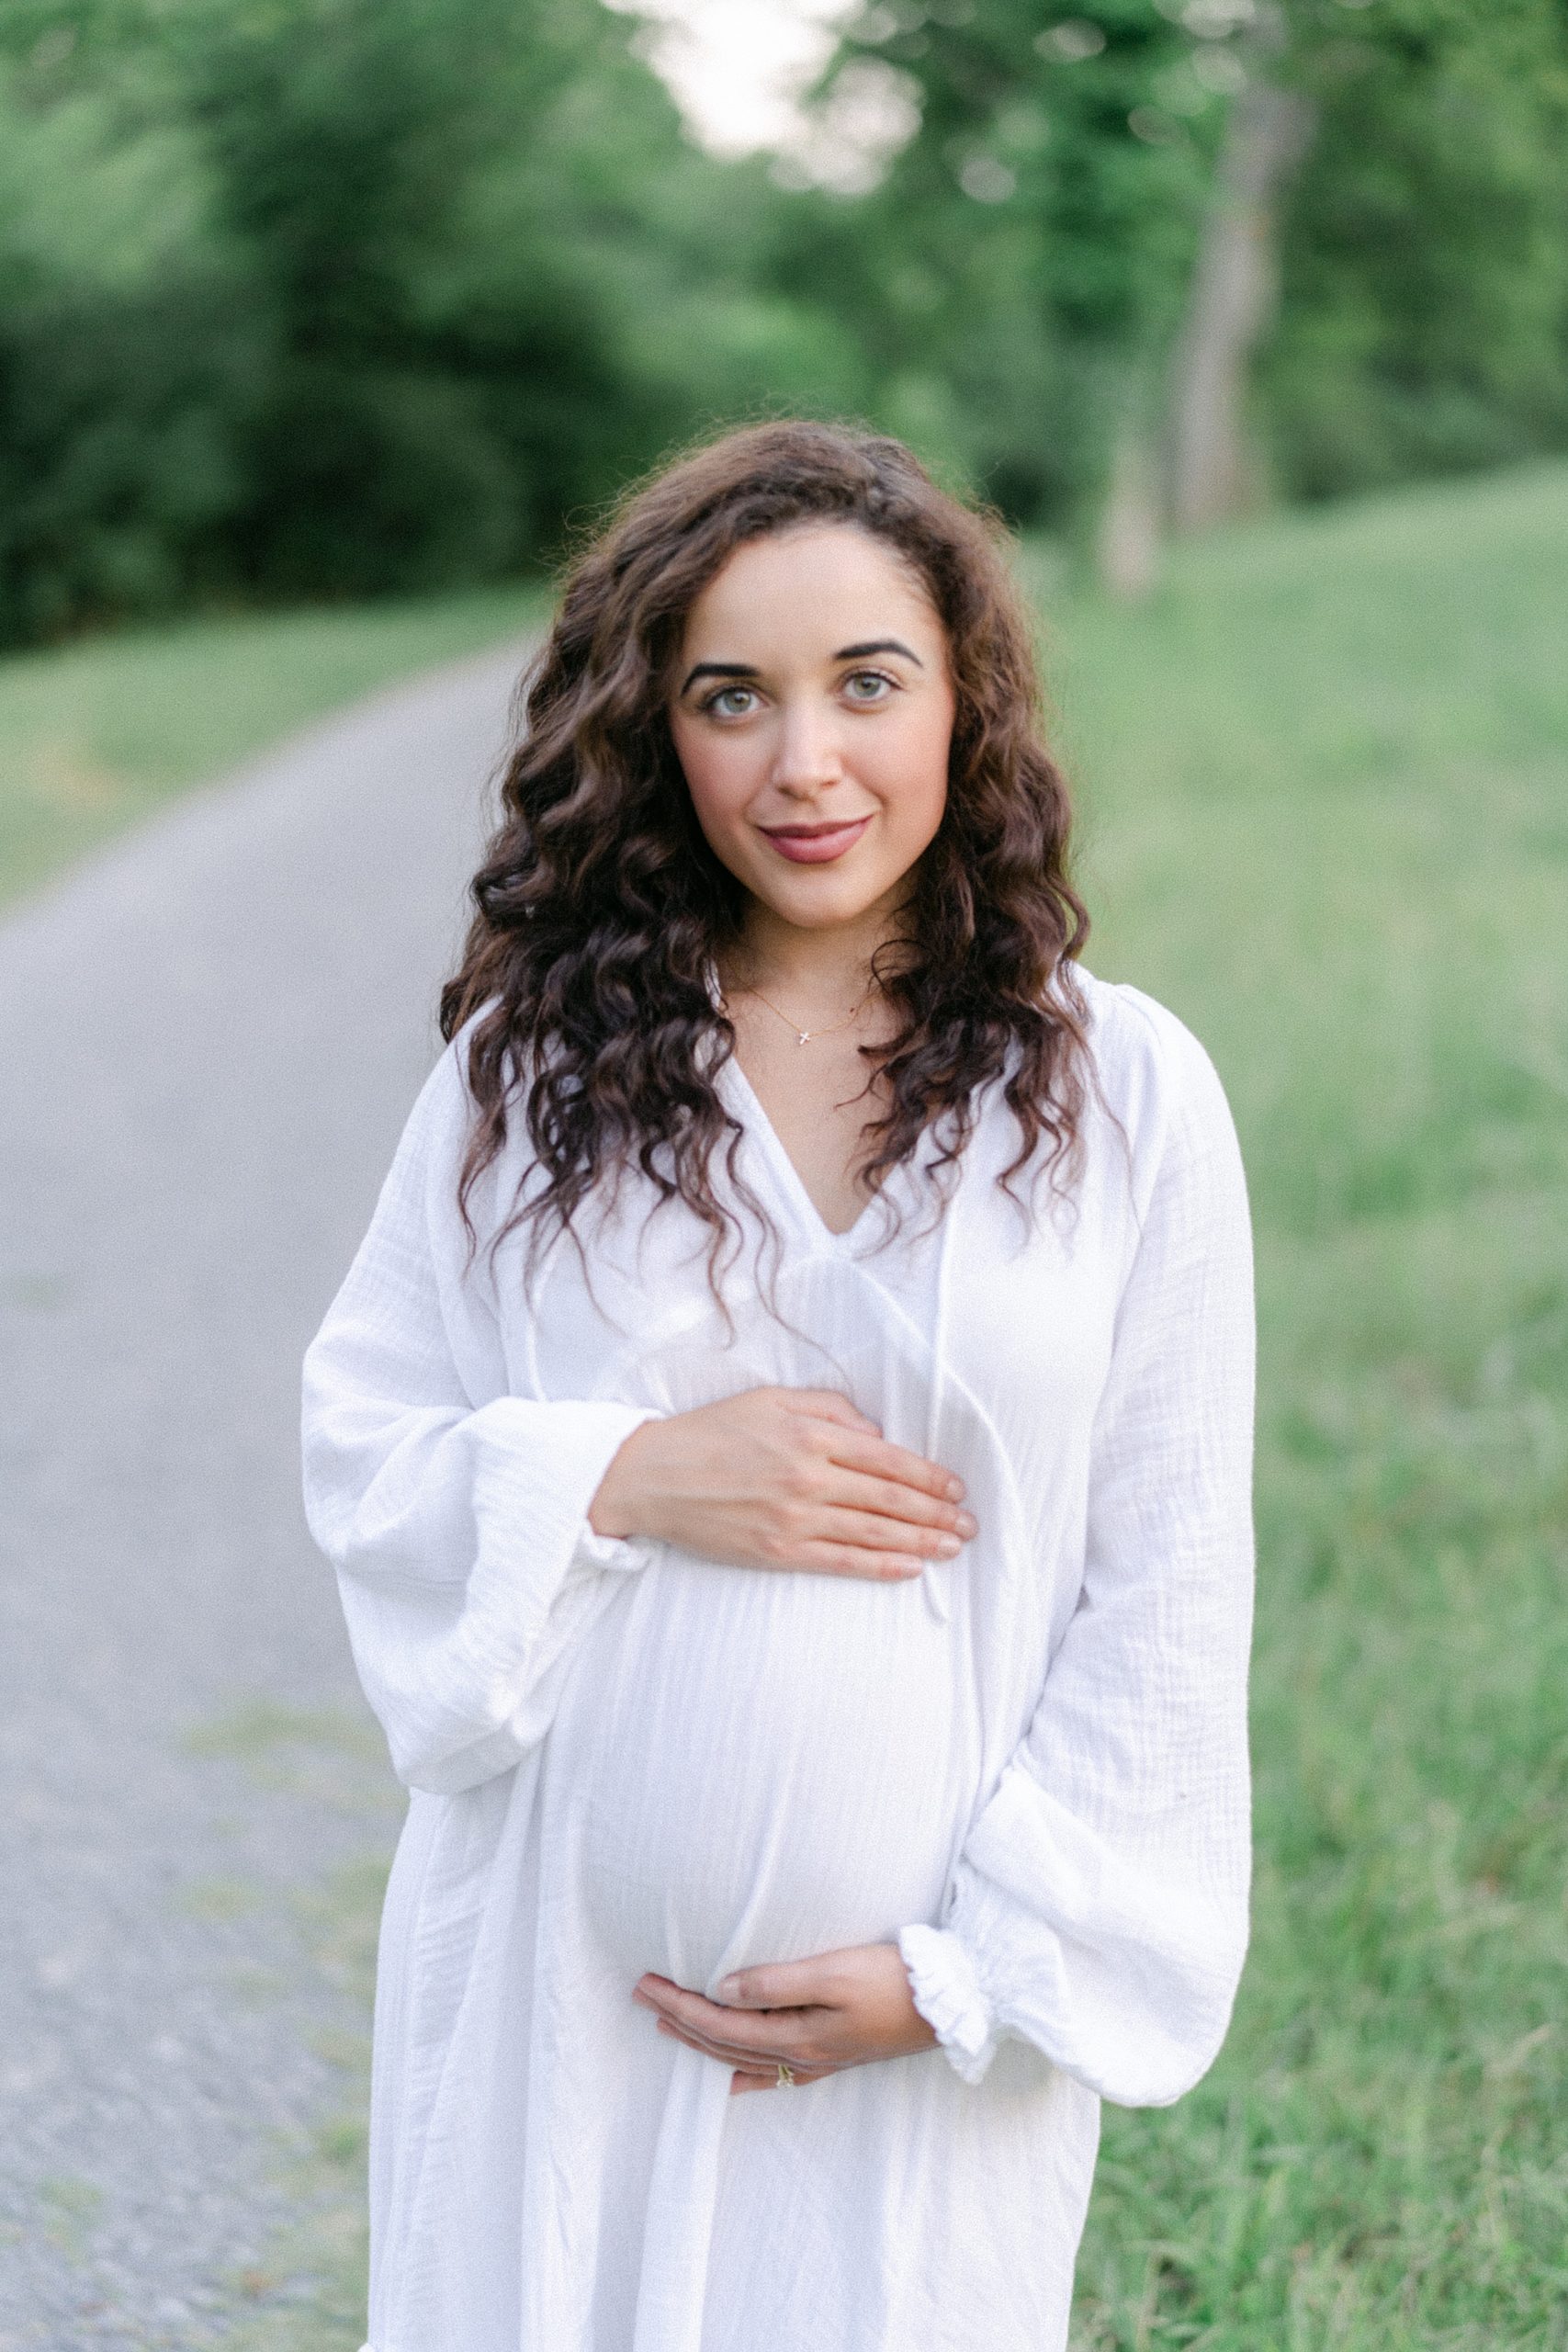 Pregnant woman holds baby bump during Maternity session